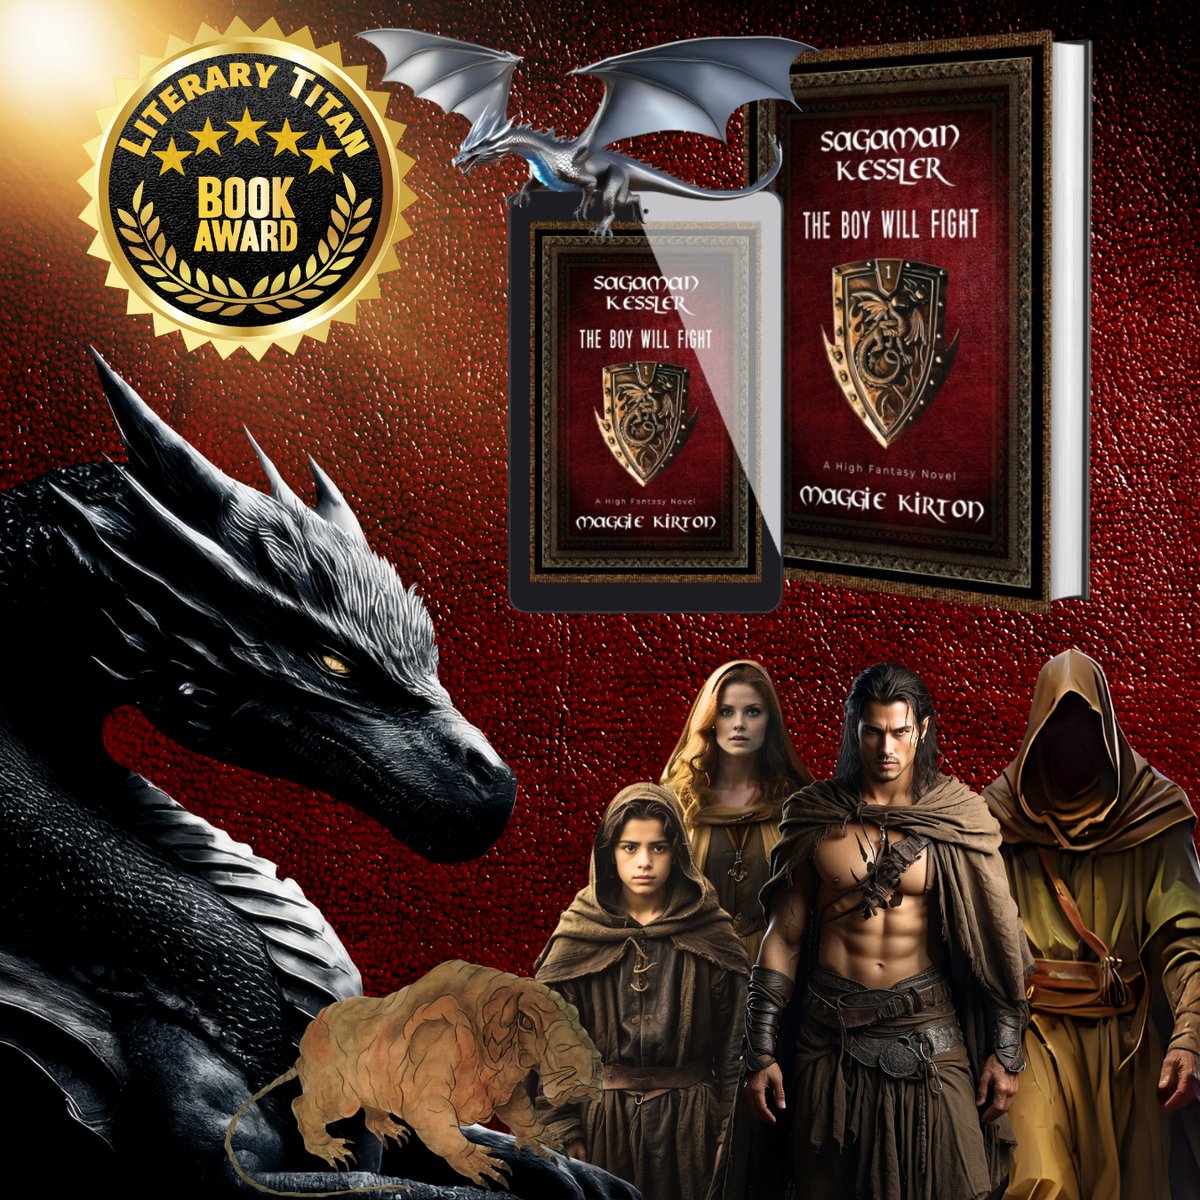 Thank you for this recognition @LiteraryTitan!
May this series continue to enthrall and entertain readers and impart valuable lessons through its characters' experiences.

👉 mybook.to/sagamankessler1
#highfantasy #amreading #mustread #Sagamanseries